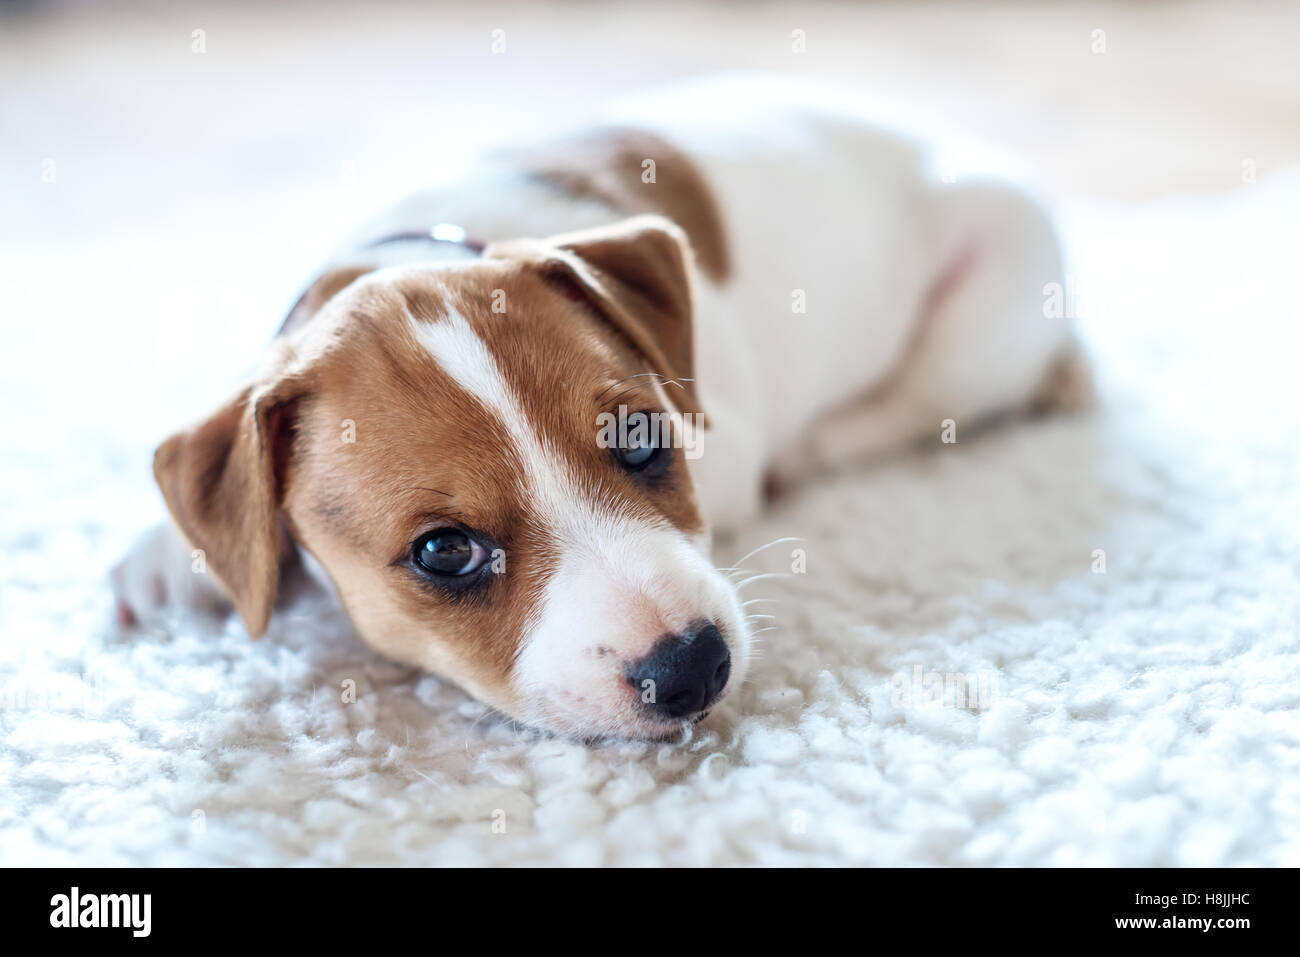 jack russel puppy on white carpet Stock Photo